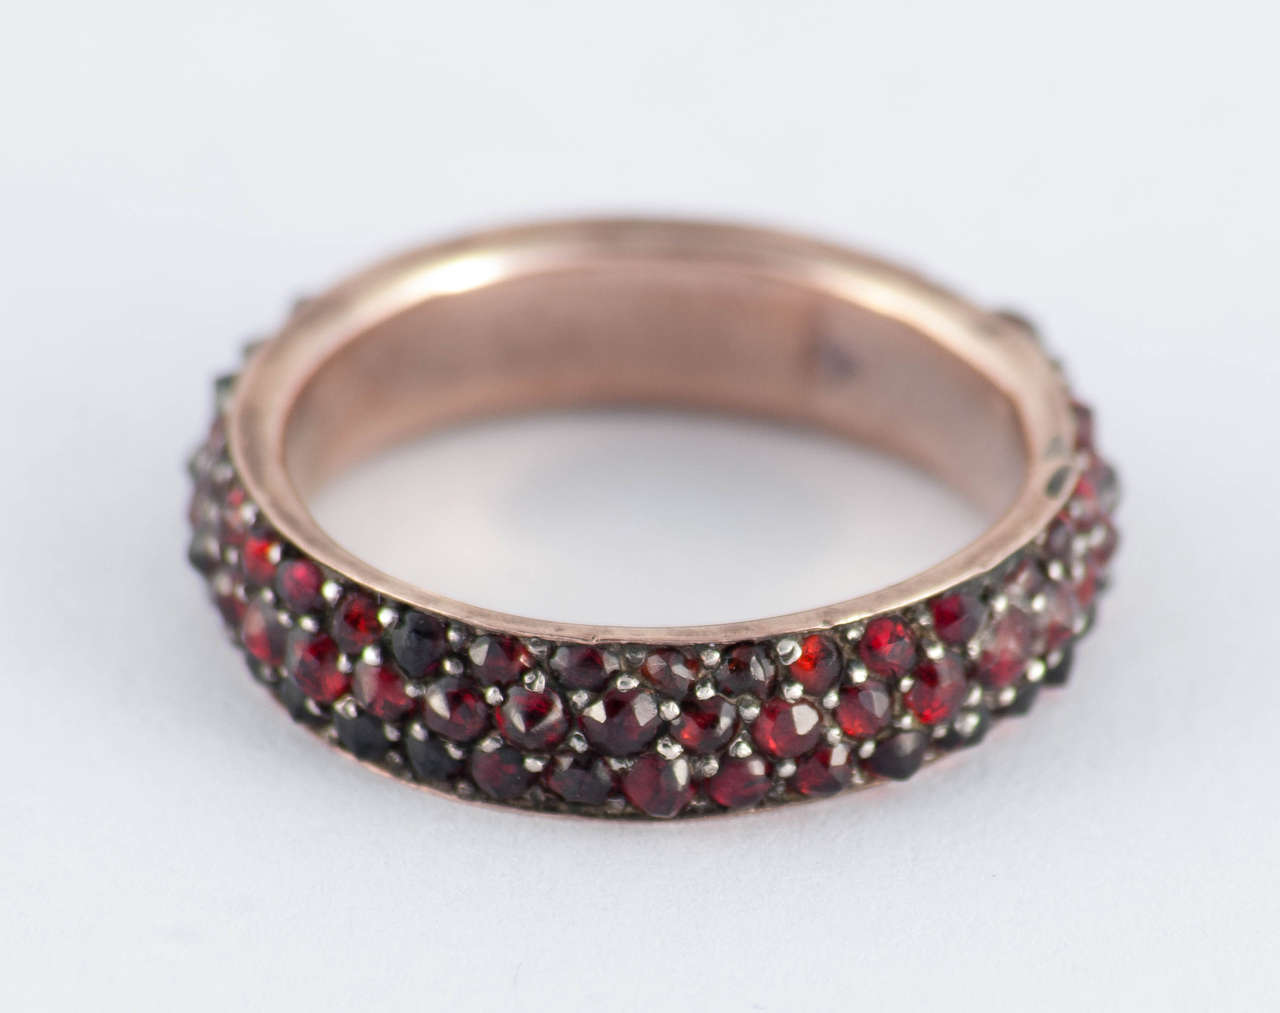 Bold late Victorian Bohemian garnet eternity band set in 9K gold. Wonderful to wear alone or stacked with other rings. The ring is a size 6 1/2 and measures 1/4